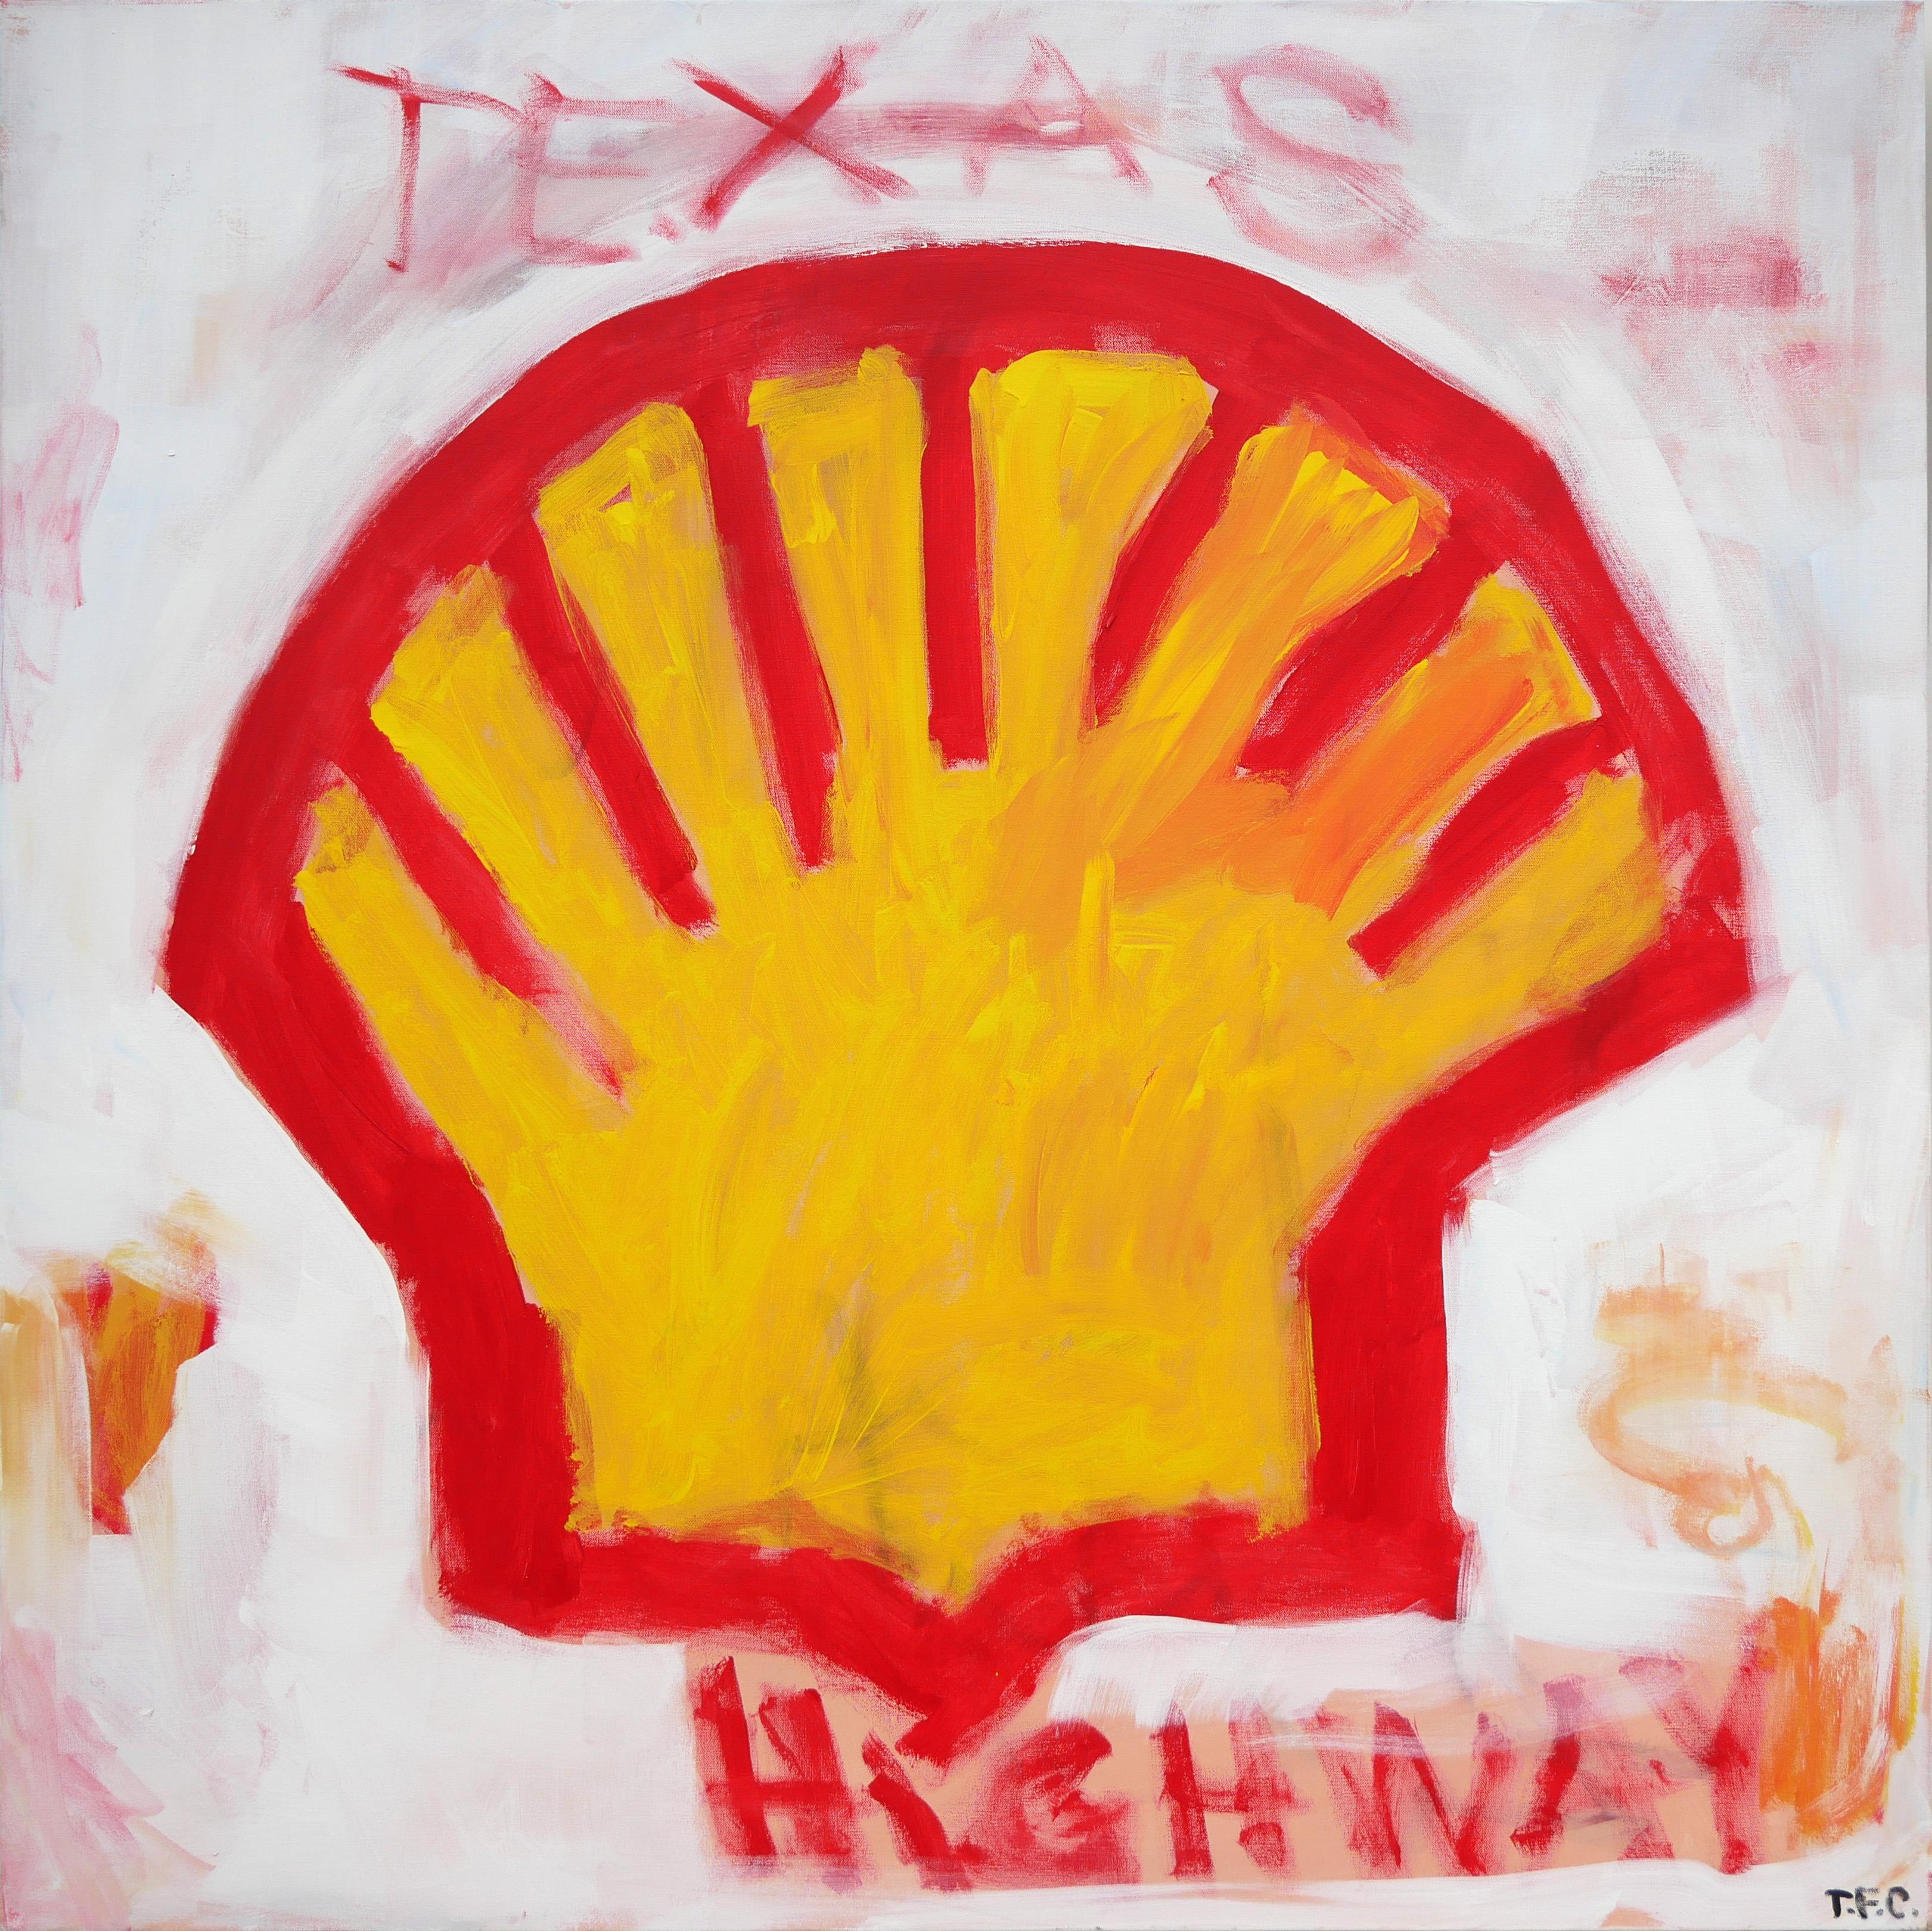 "Shell" Contemporary Abstract Pop Art Painting of an Oil and Gas Company Logo